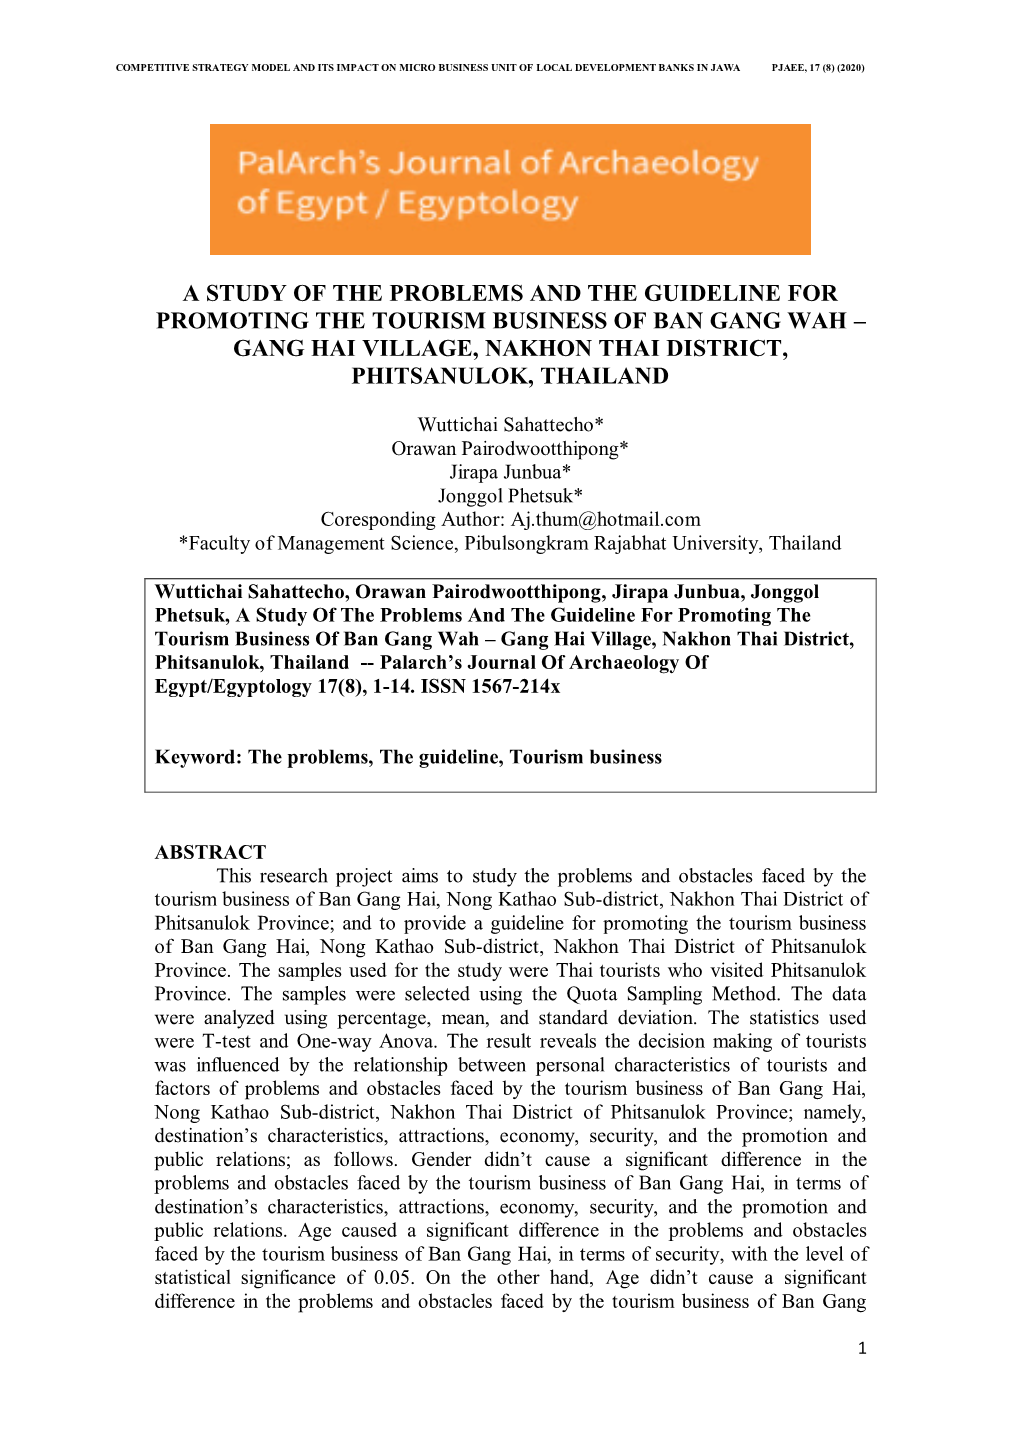 A Study of the Problems and the Guideline for Promoting the Tourism Business of Ban Gang Wah – Gang Hai Village, Nakhon Thai District, Phitsanulok, Thailand